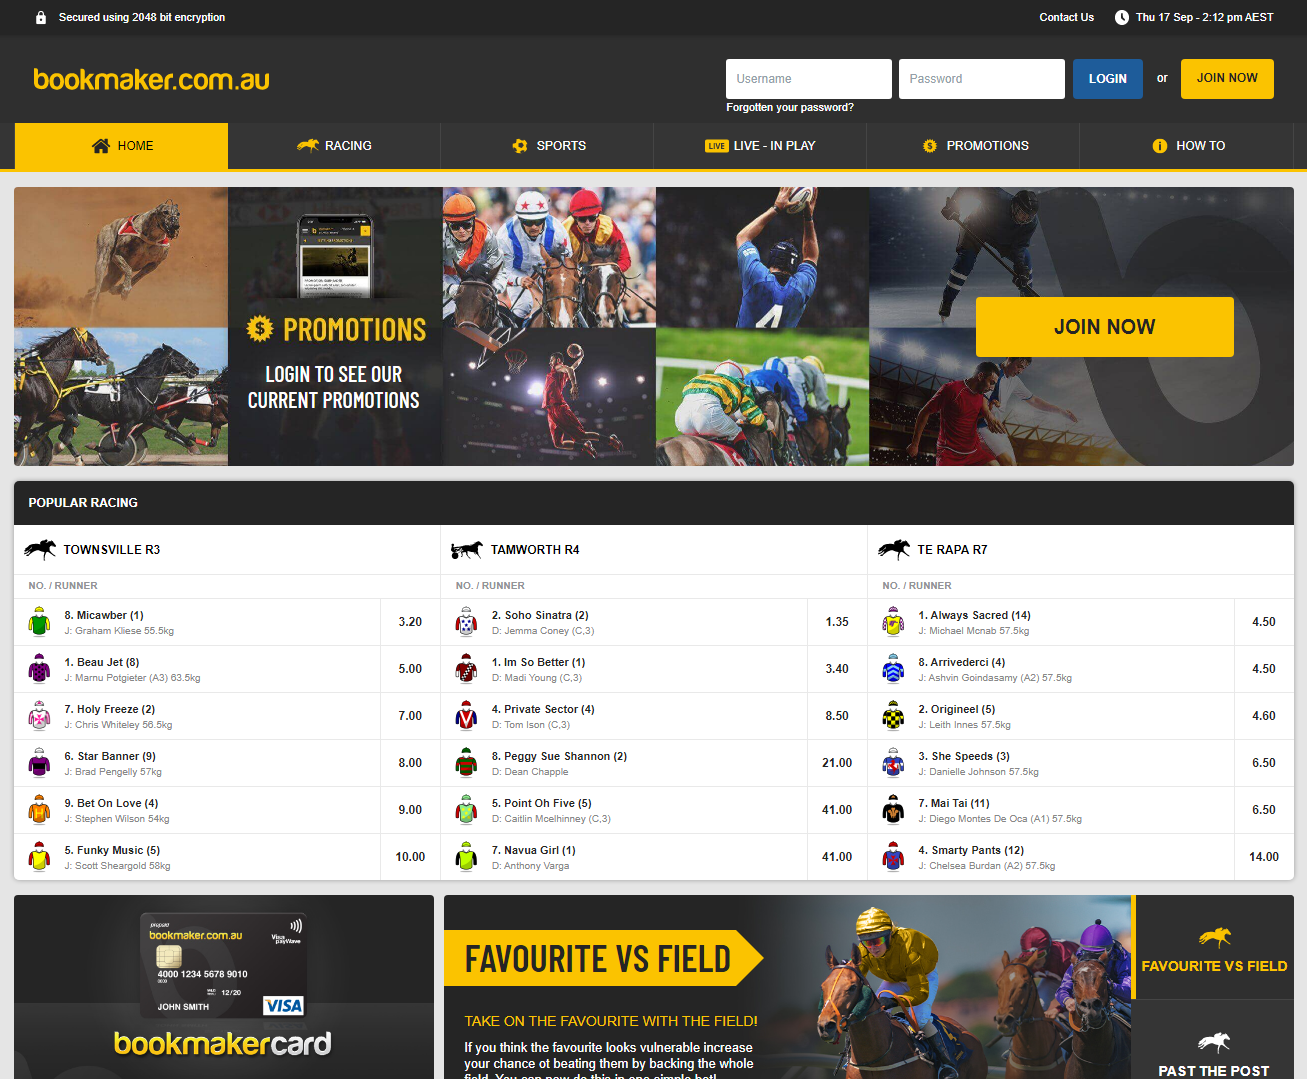 Free Bookmaker Offers, Bonus Bets and Promos